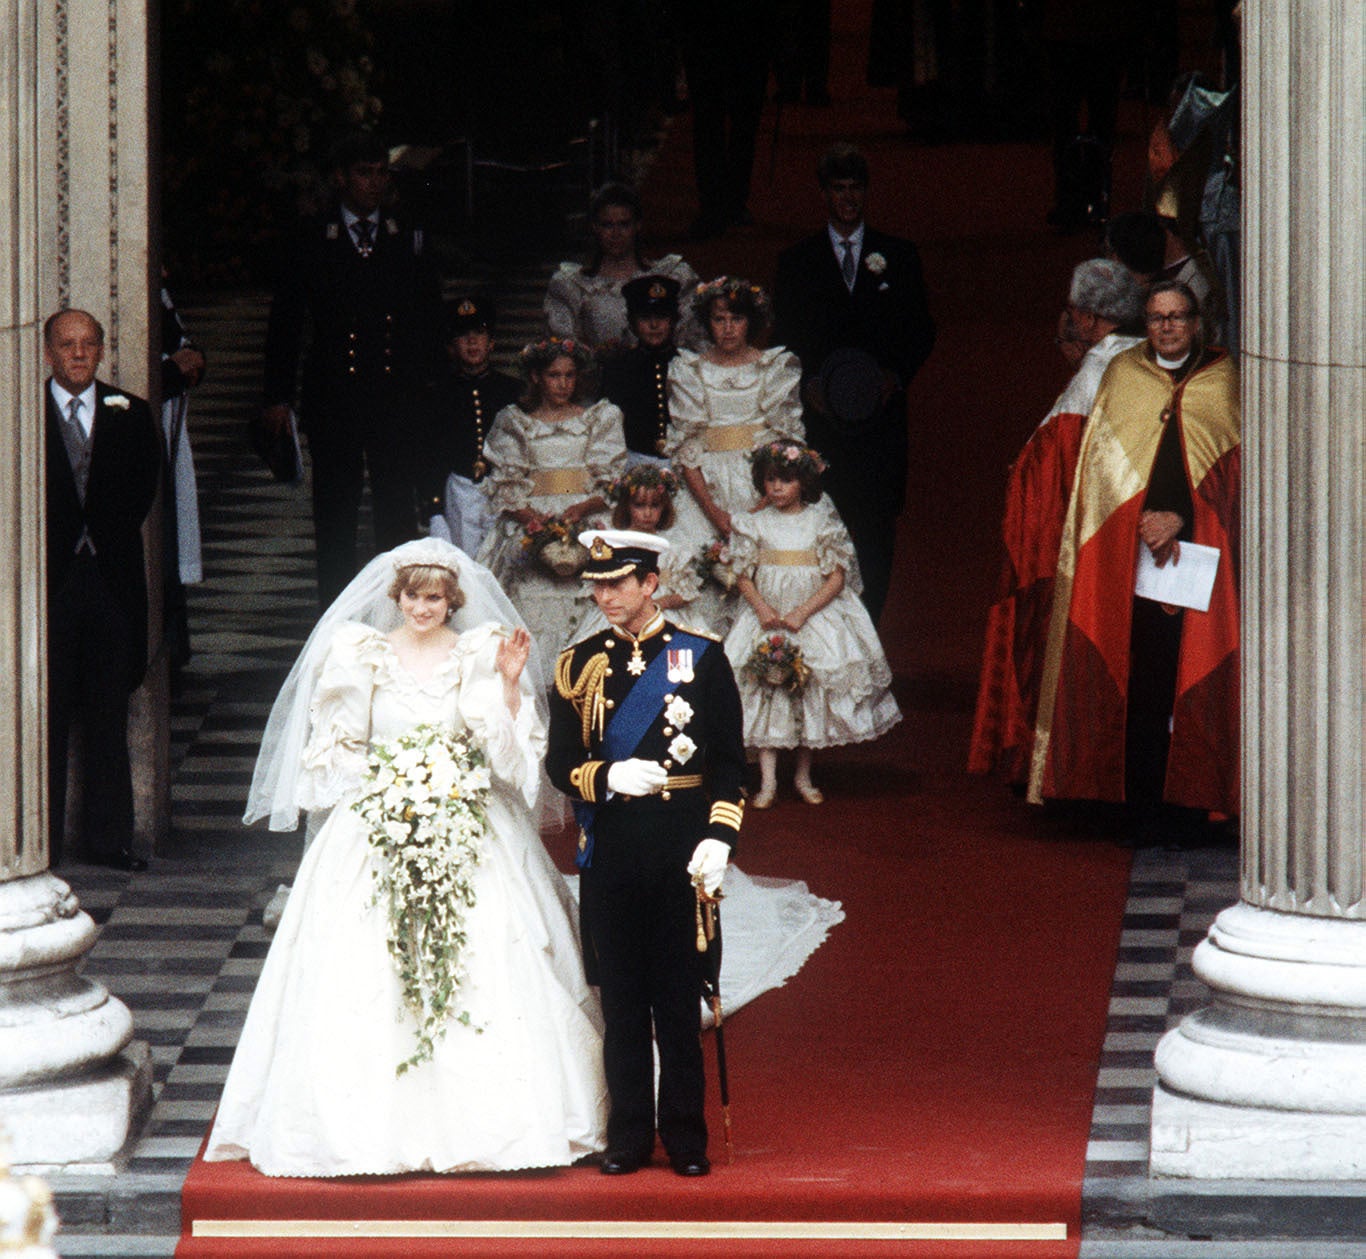 The Princess of Wales waves to the crowds as she leaves St Paul’s Cathedral with her husband, the Prince of Wales, after their wedding in 1981 (PA)